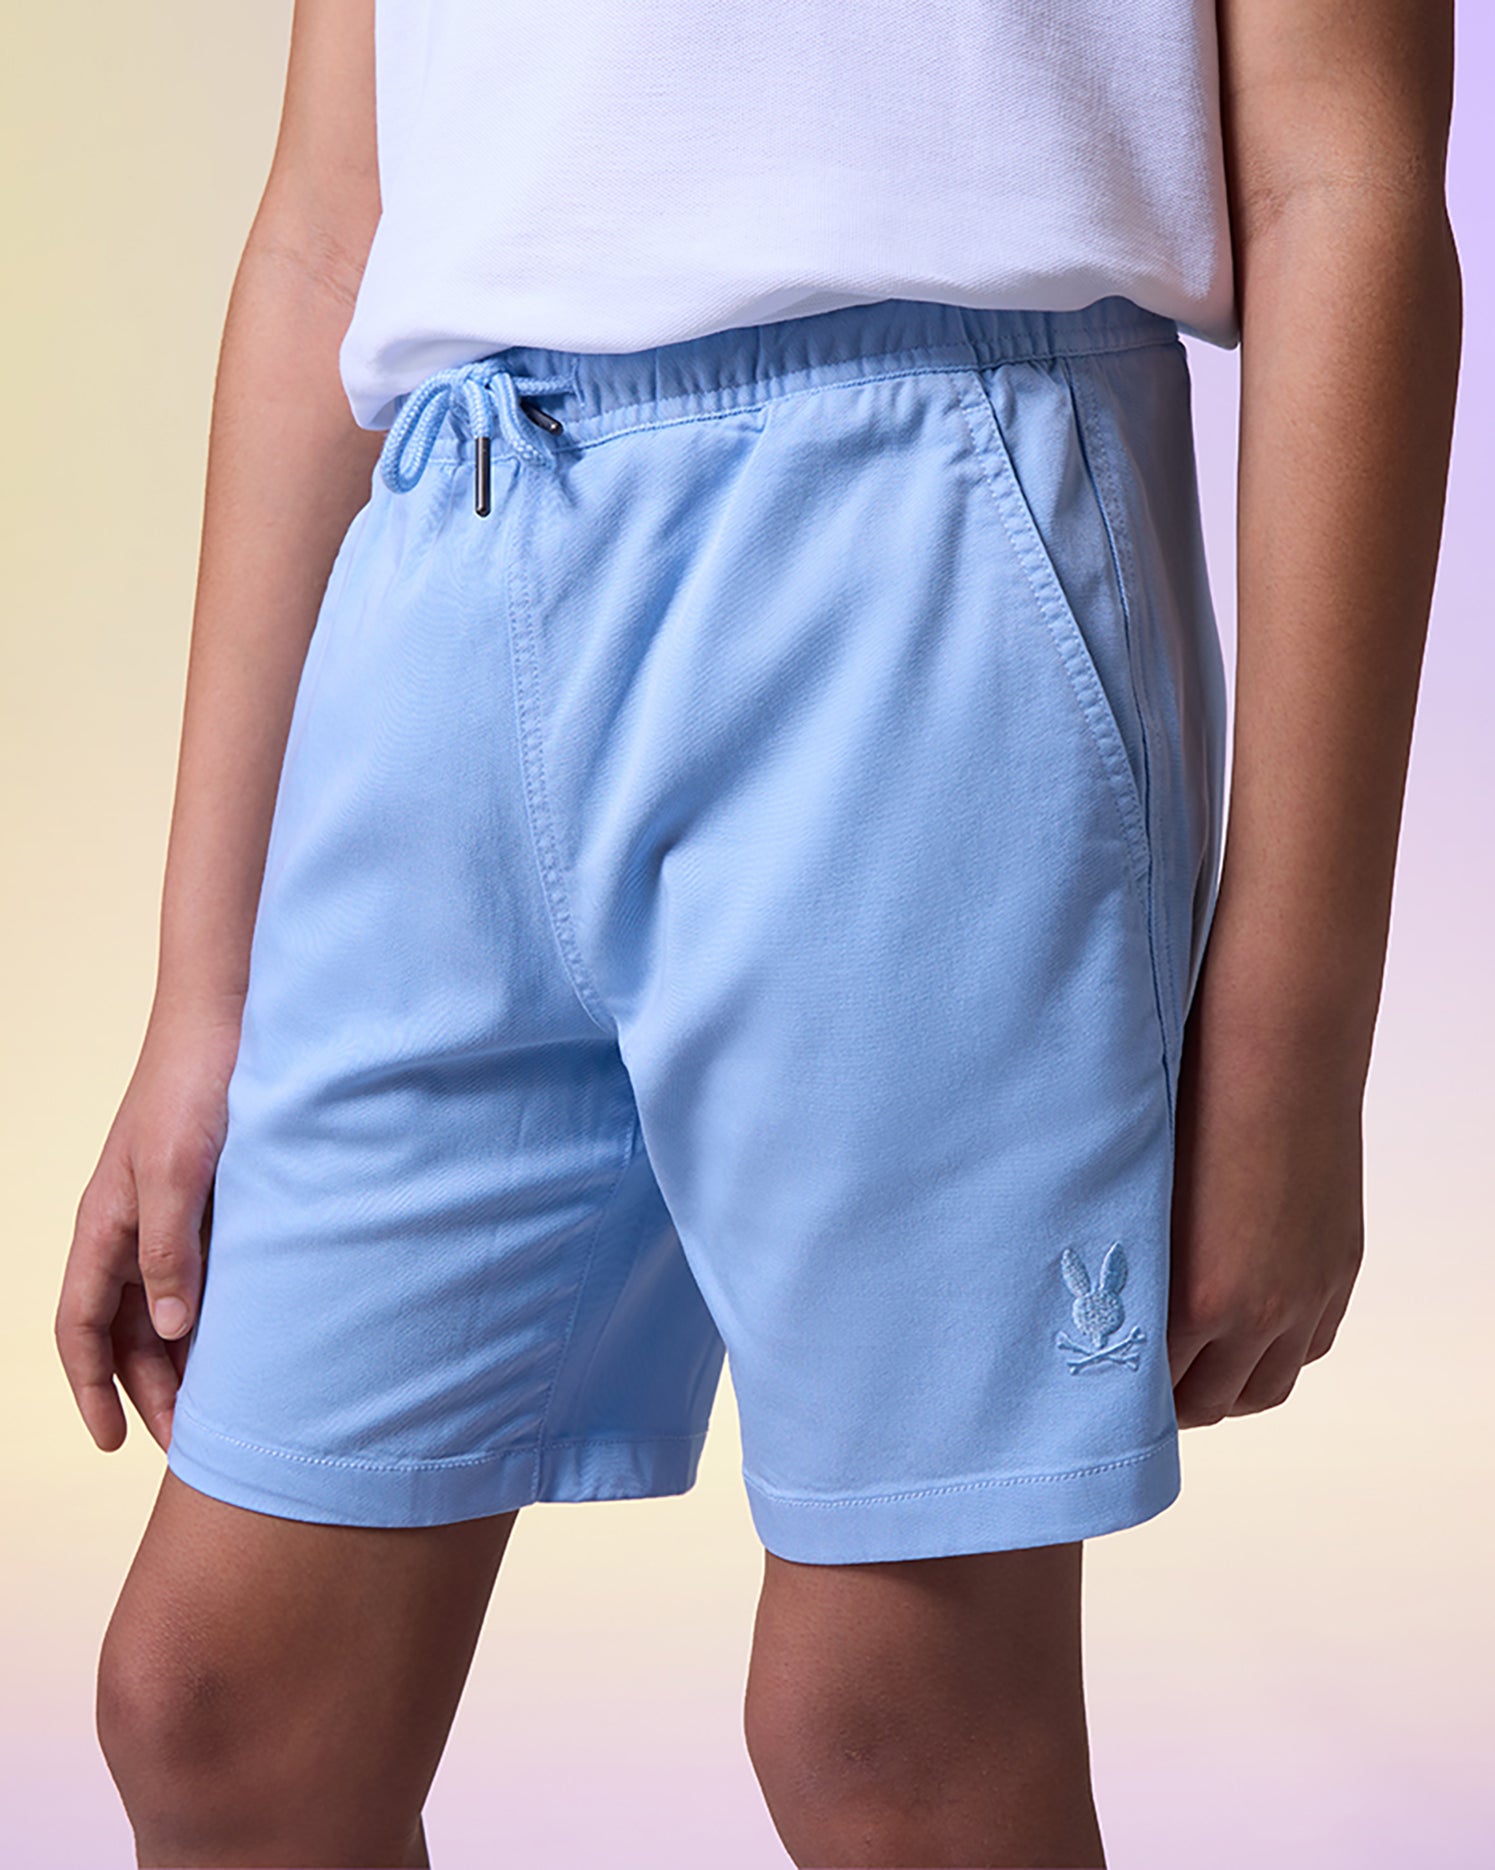 A person stands wearing a white shirt and light blue KIDS WILLIS STRETCH TENCEL SHORT - B0R239Y1WB by Psycho Bunny with pockets and an embroidered logo on the left leg, made from super-soft stretch Tencel-blend twill. The background is a gradient of soft pastel colors.